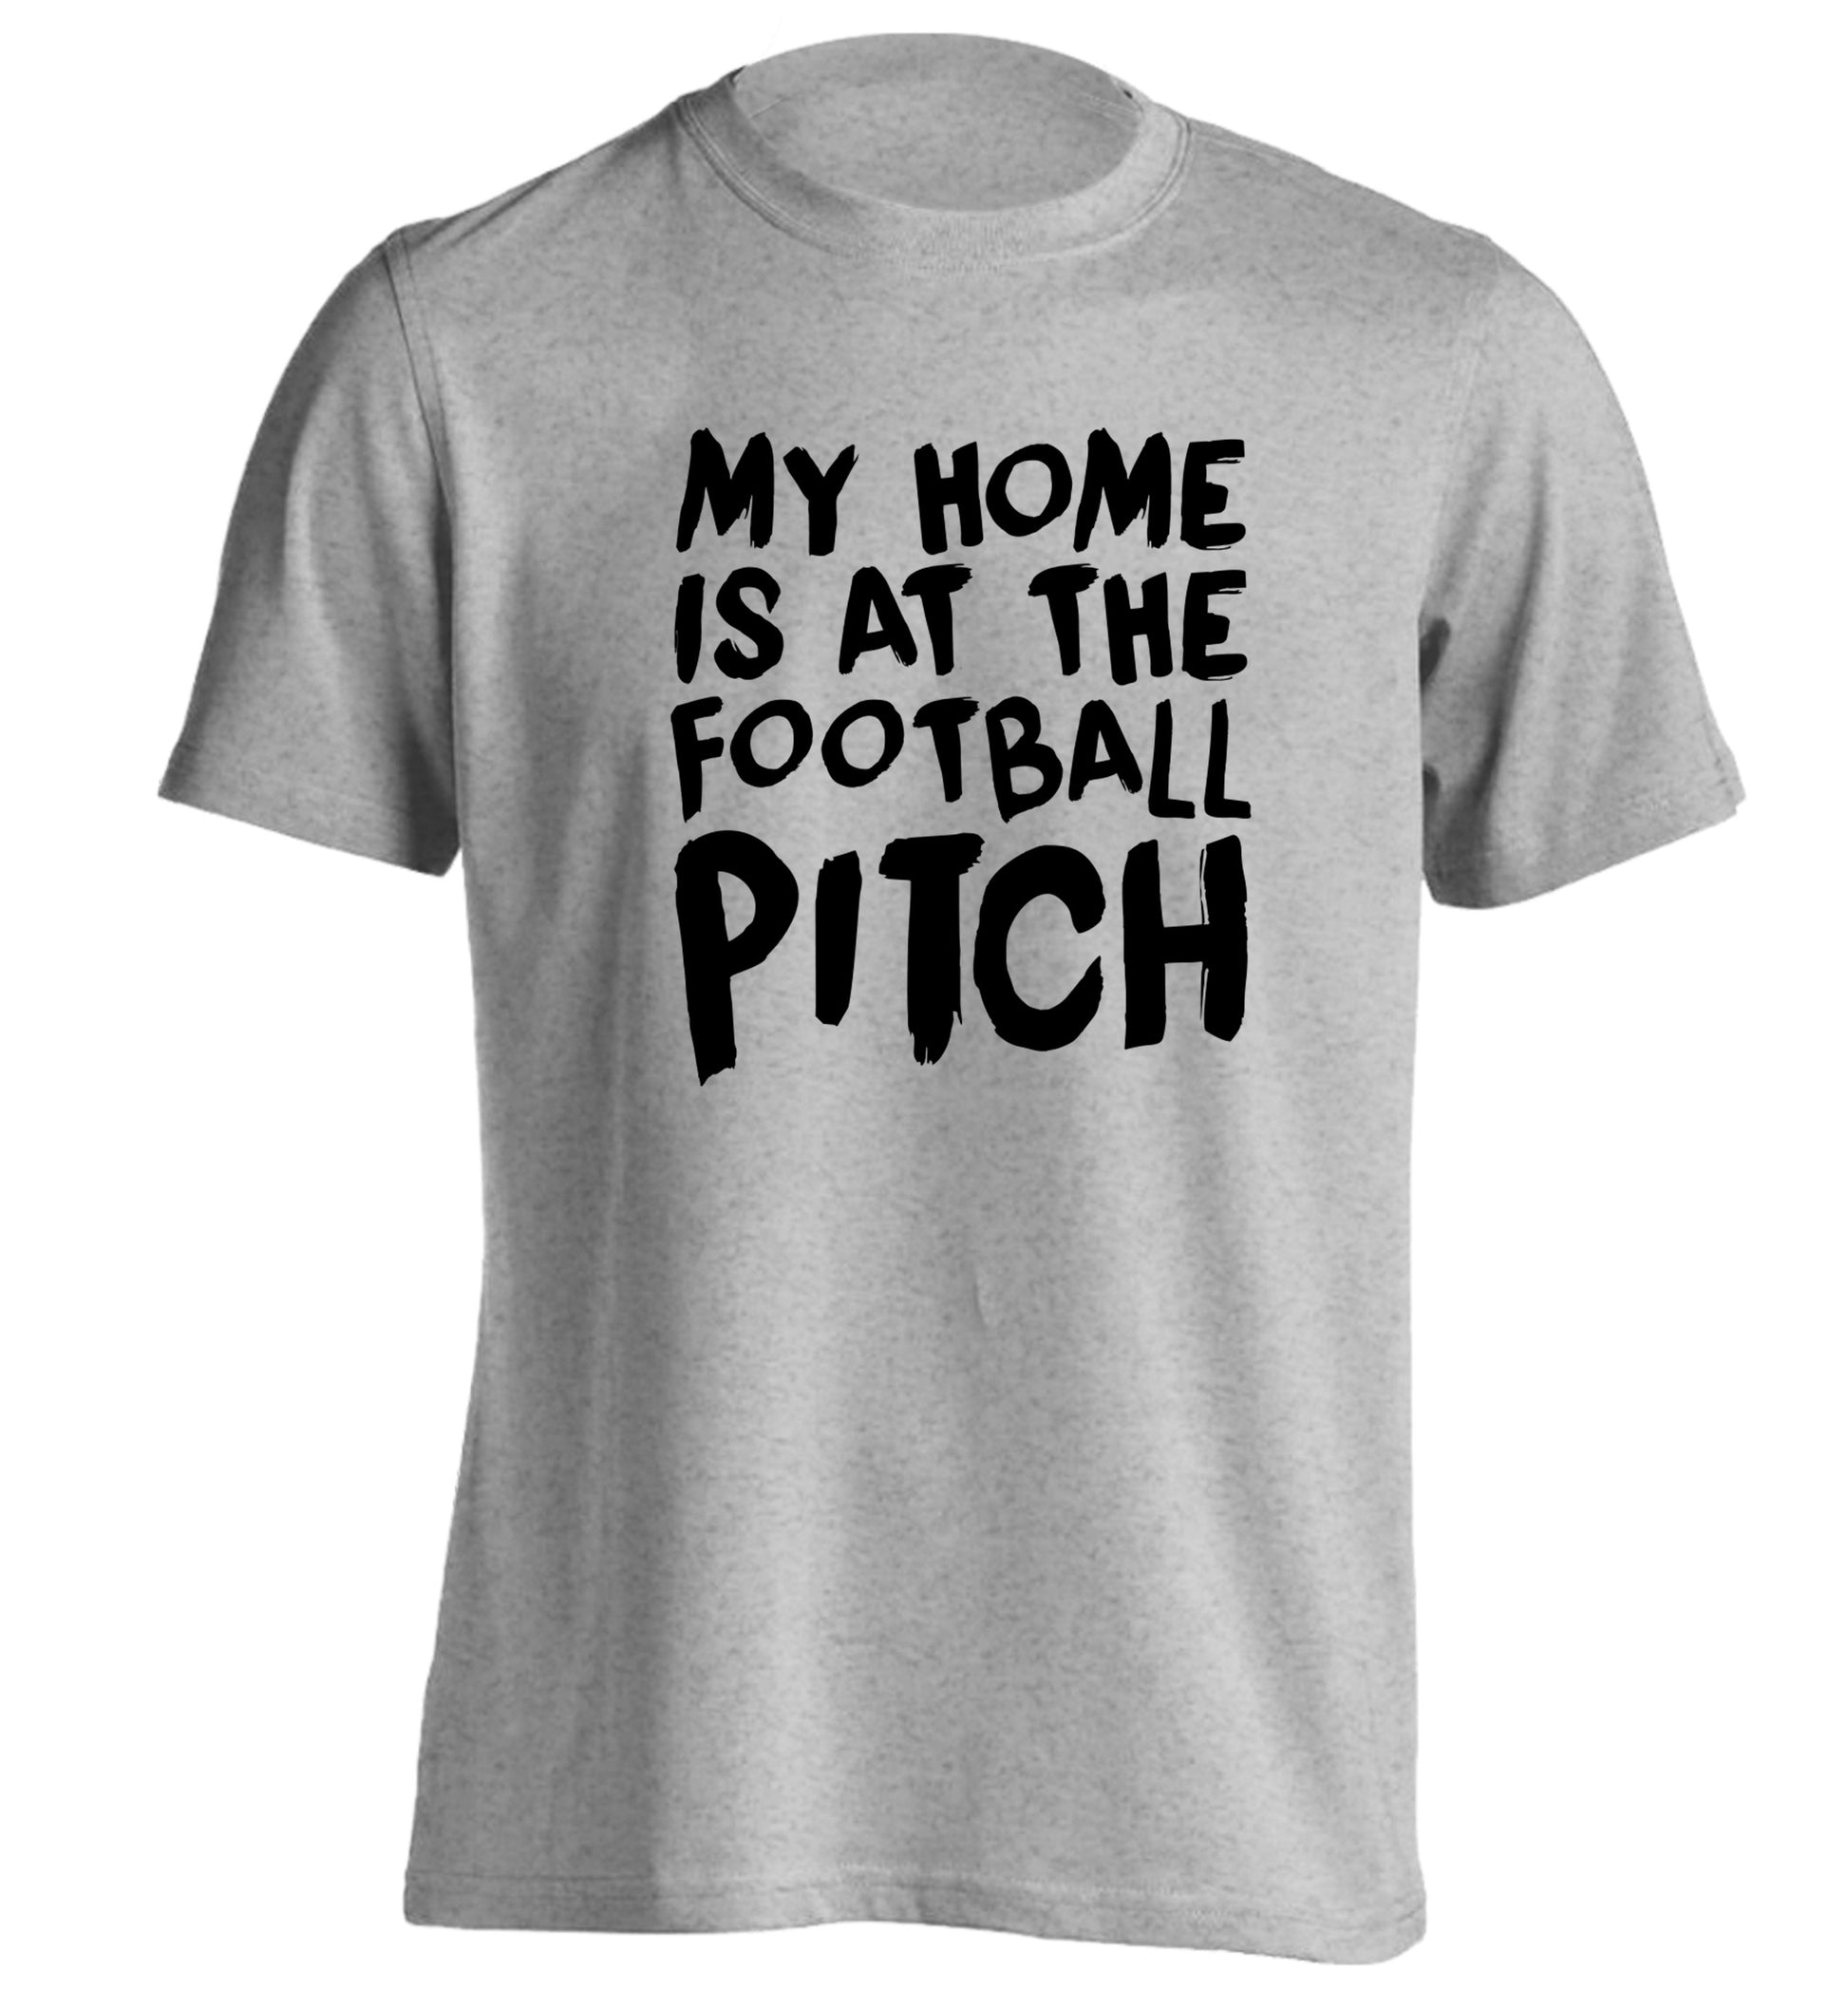 My home is at the football pitch adults unisex grey Tshirt 2XL